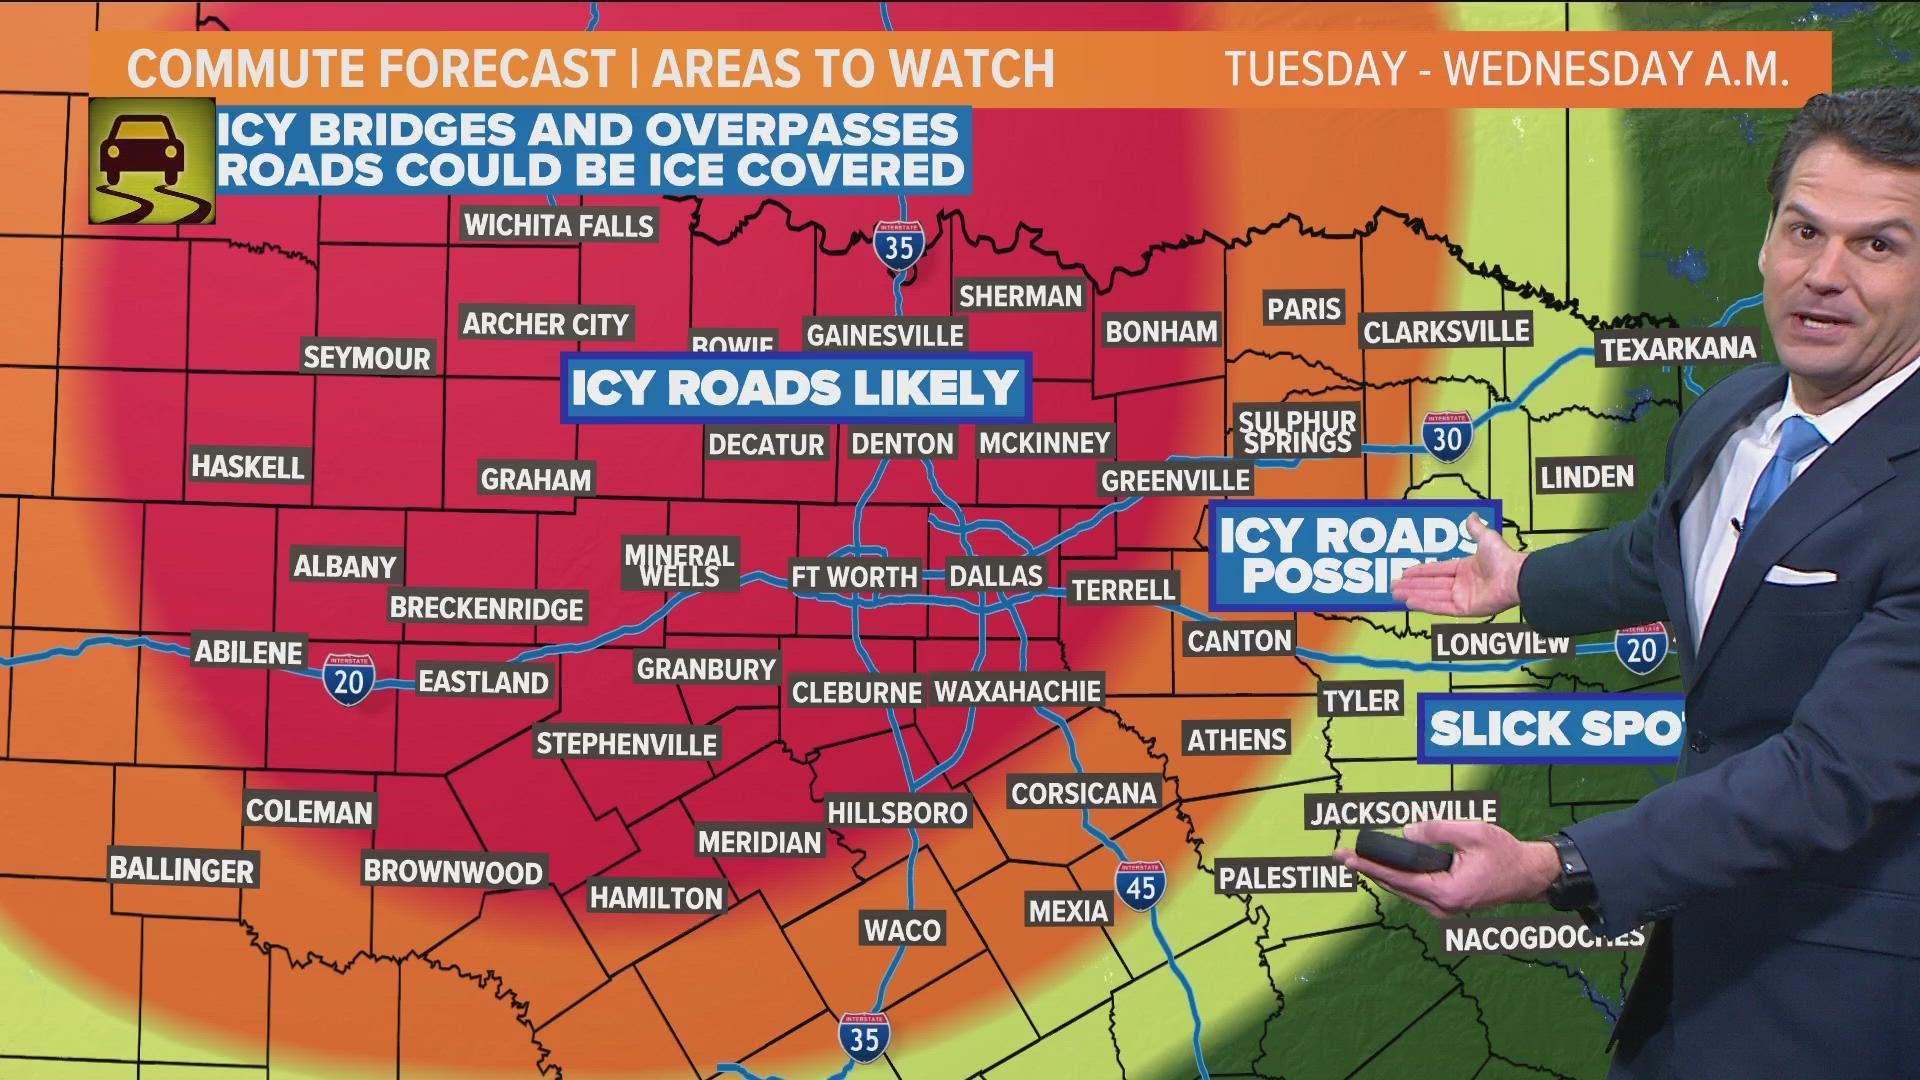 The warning is now in effect in North Texas until Wednesday. WFAA meteorologist Kyle Robert gives a timeline of what to expect when you're driving.